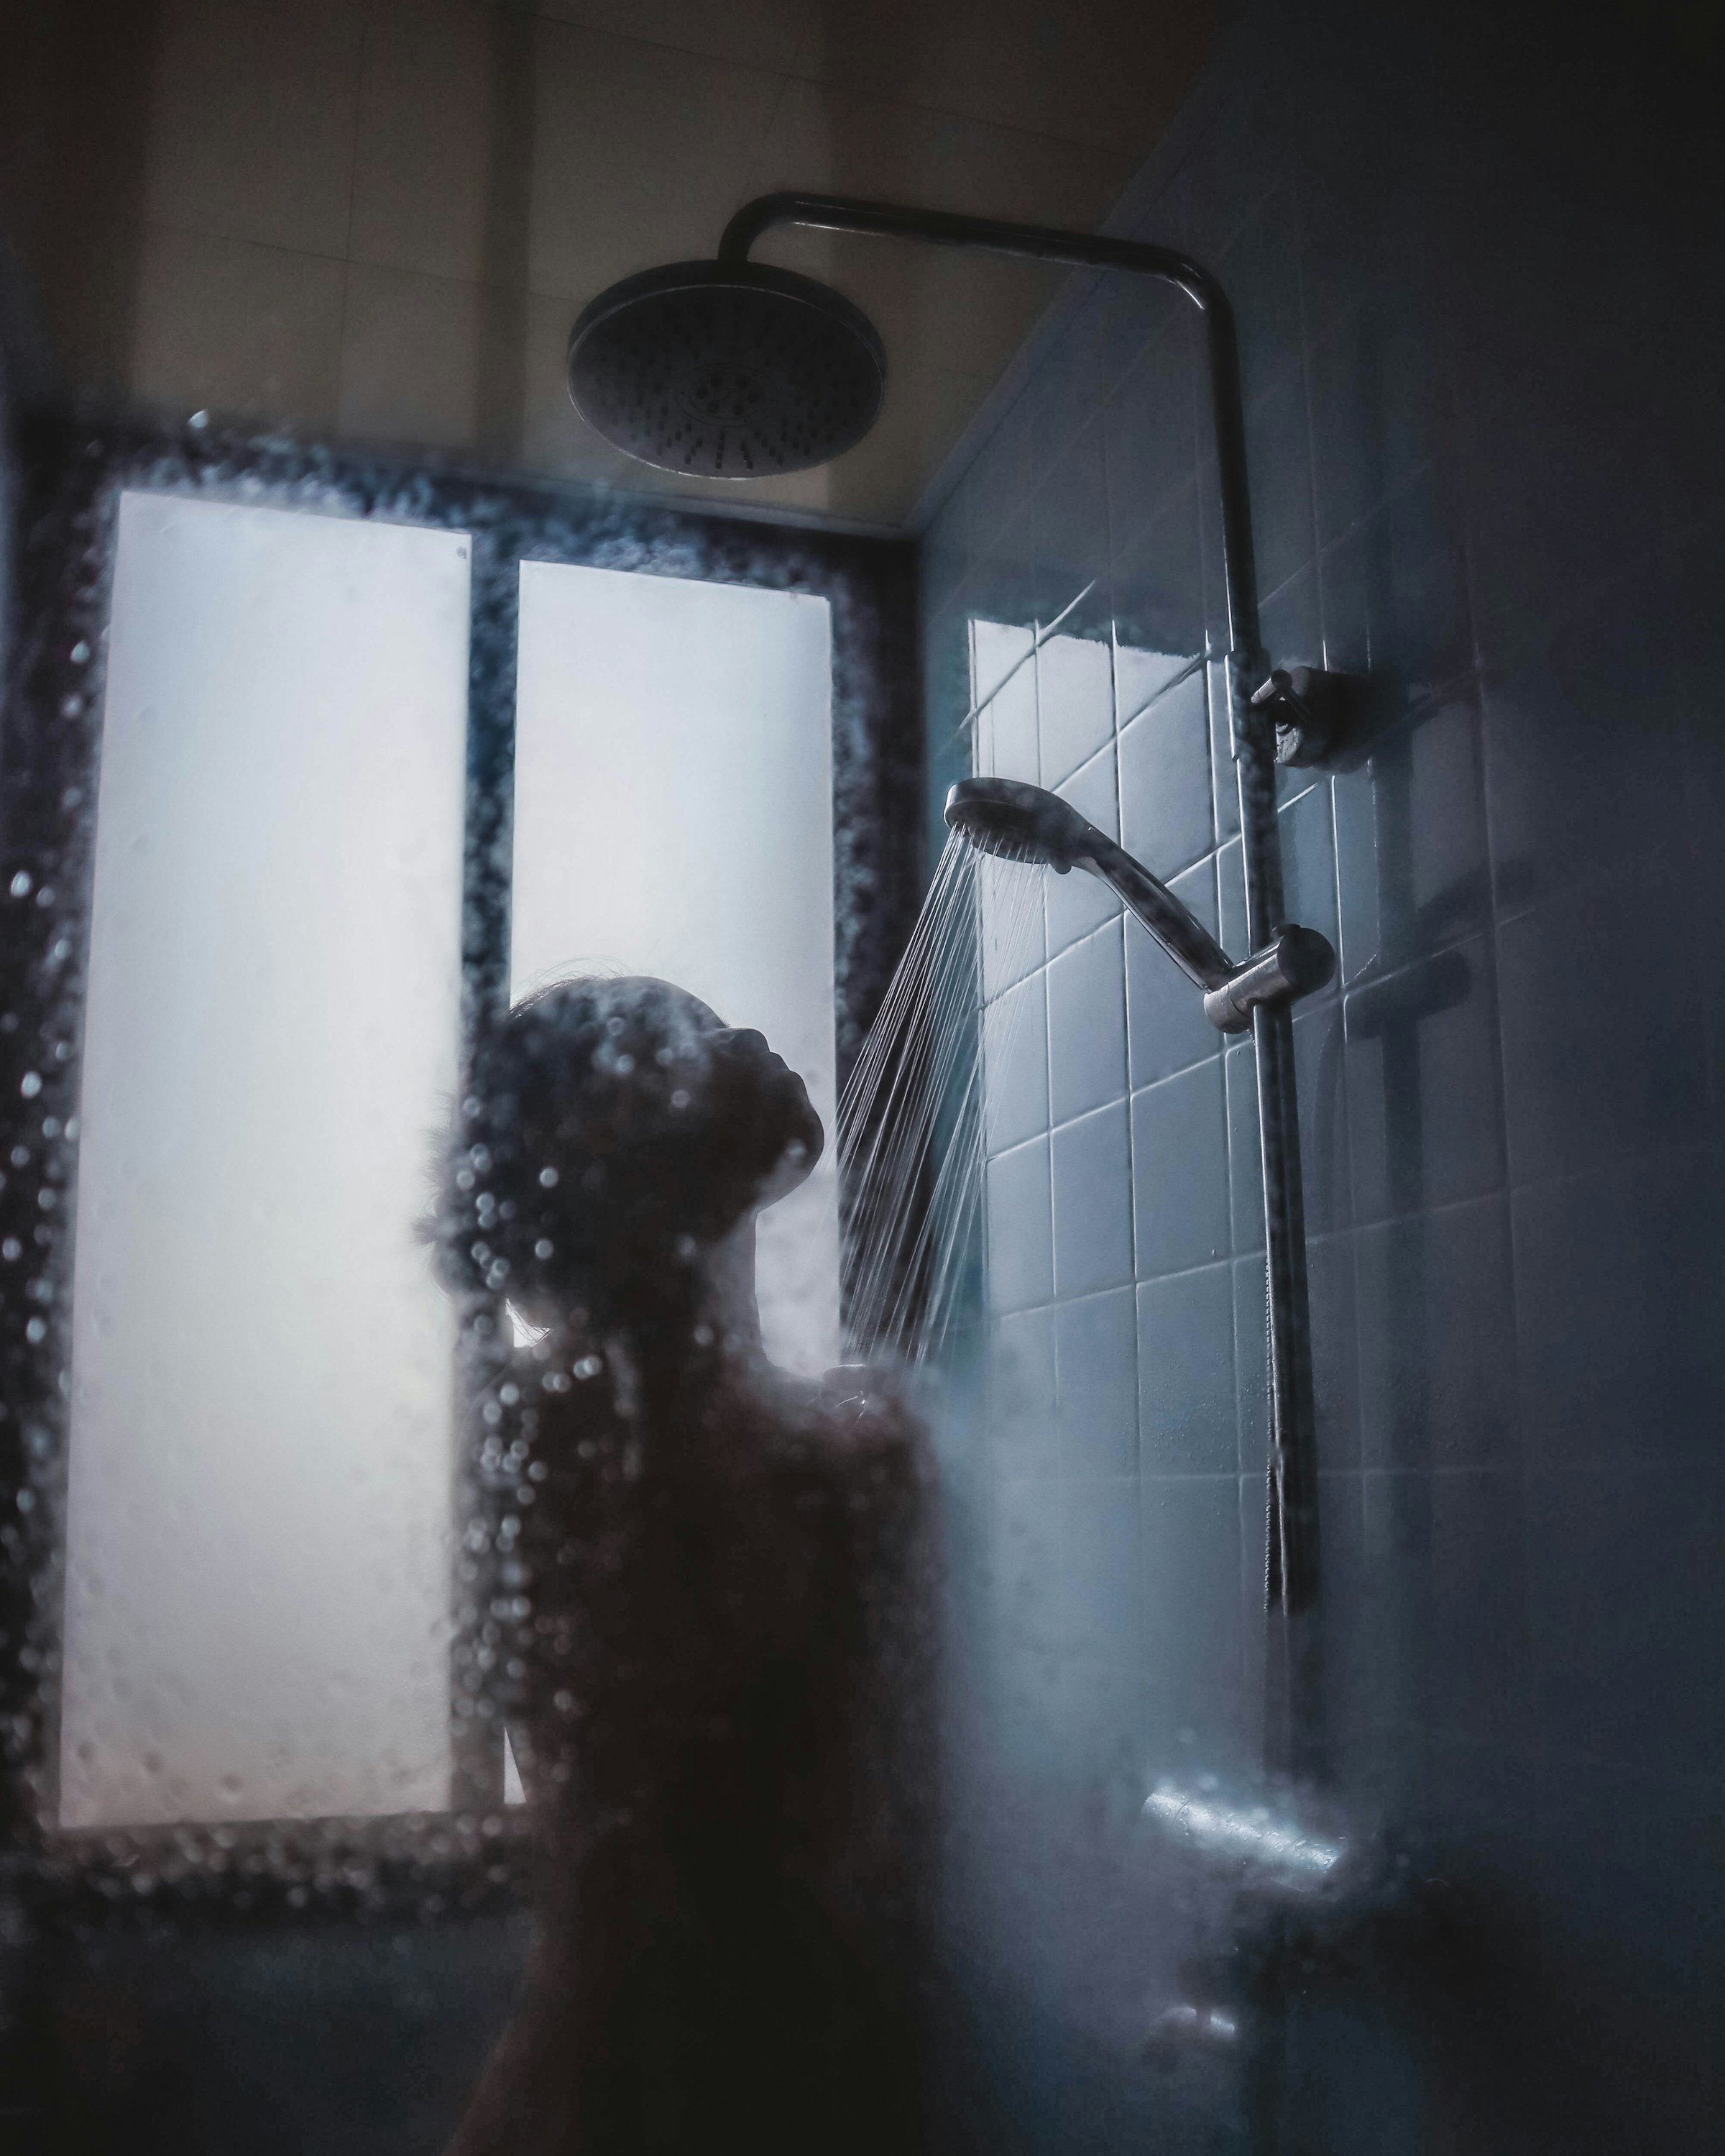 A person taking a shower | Source: Unsplash